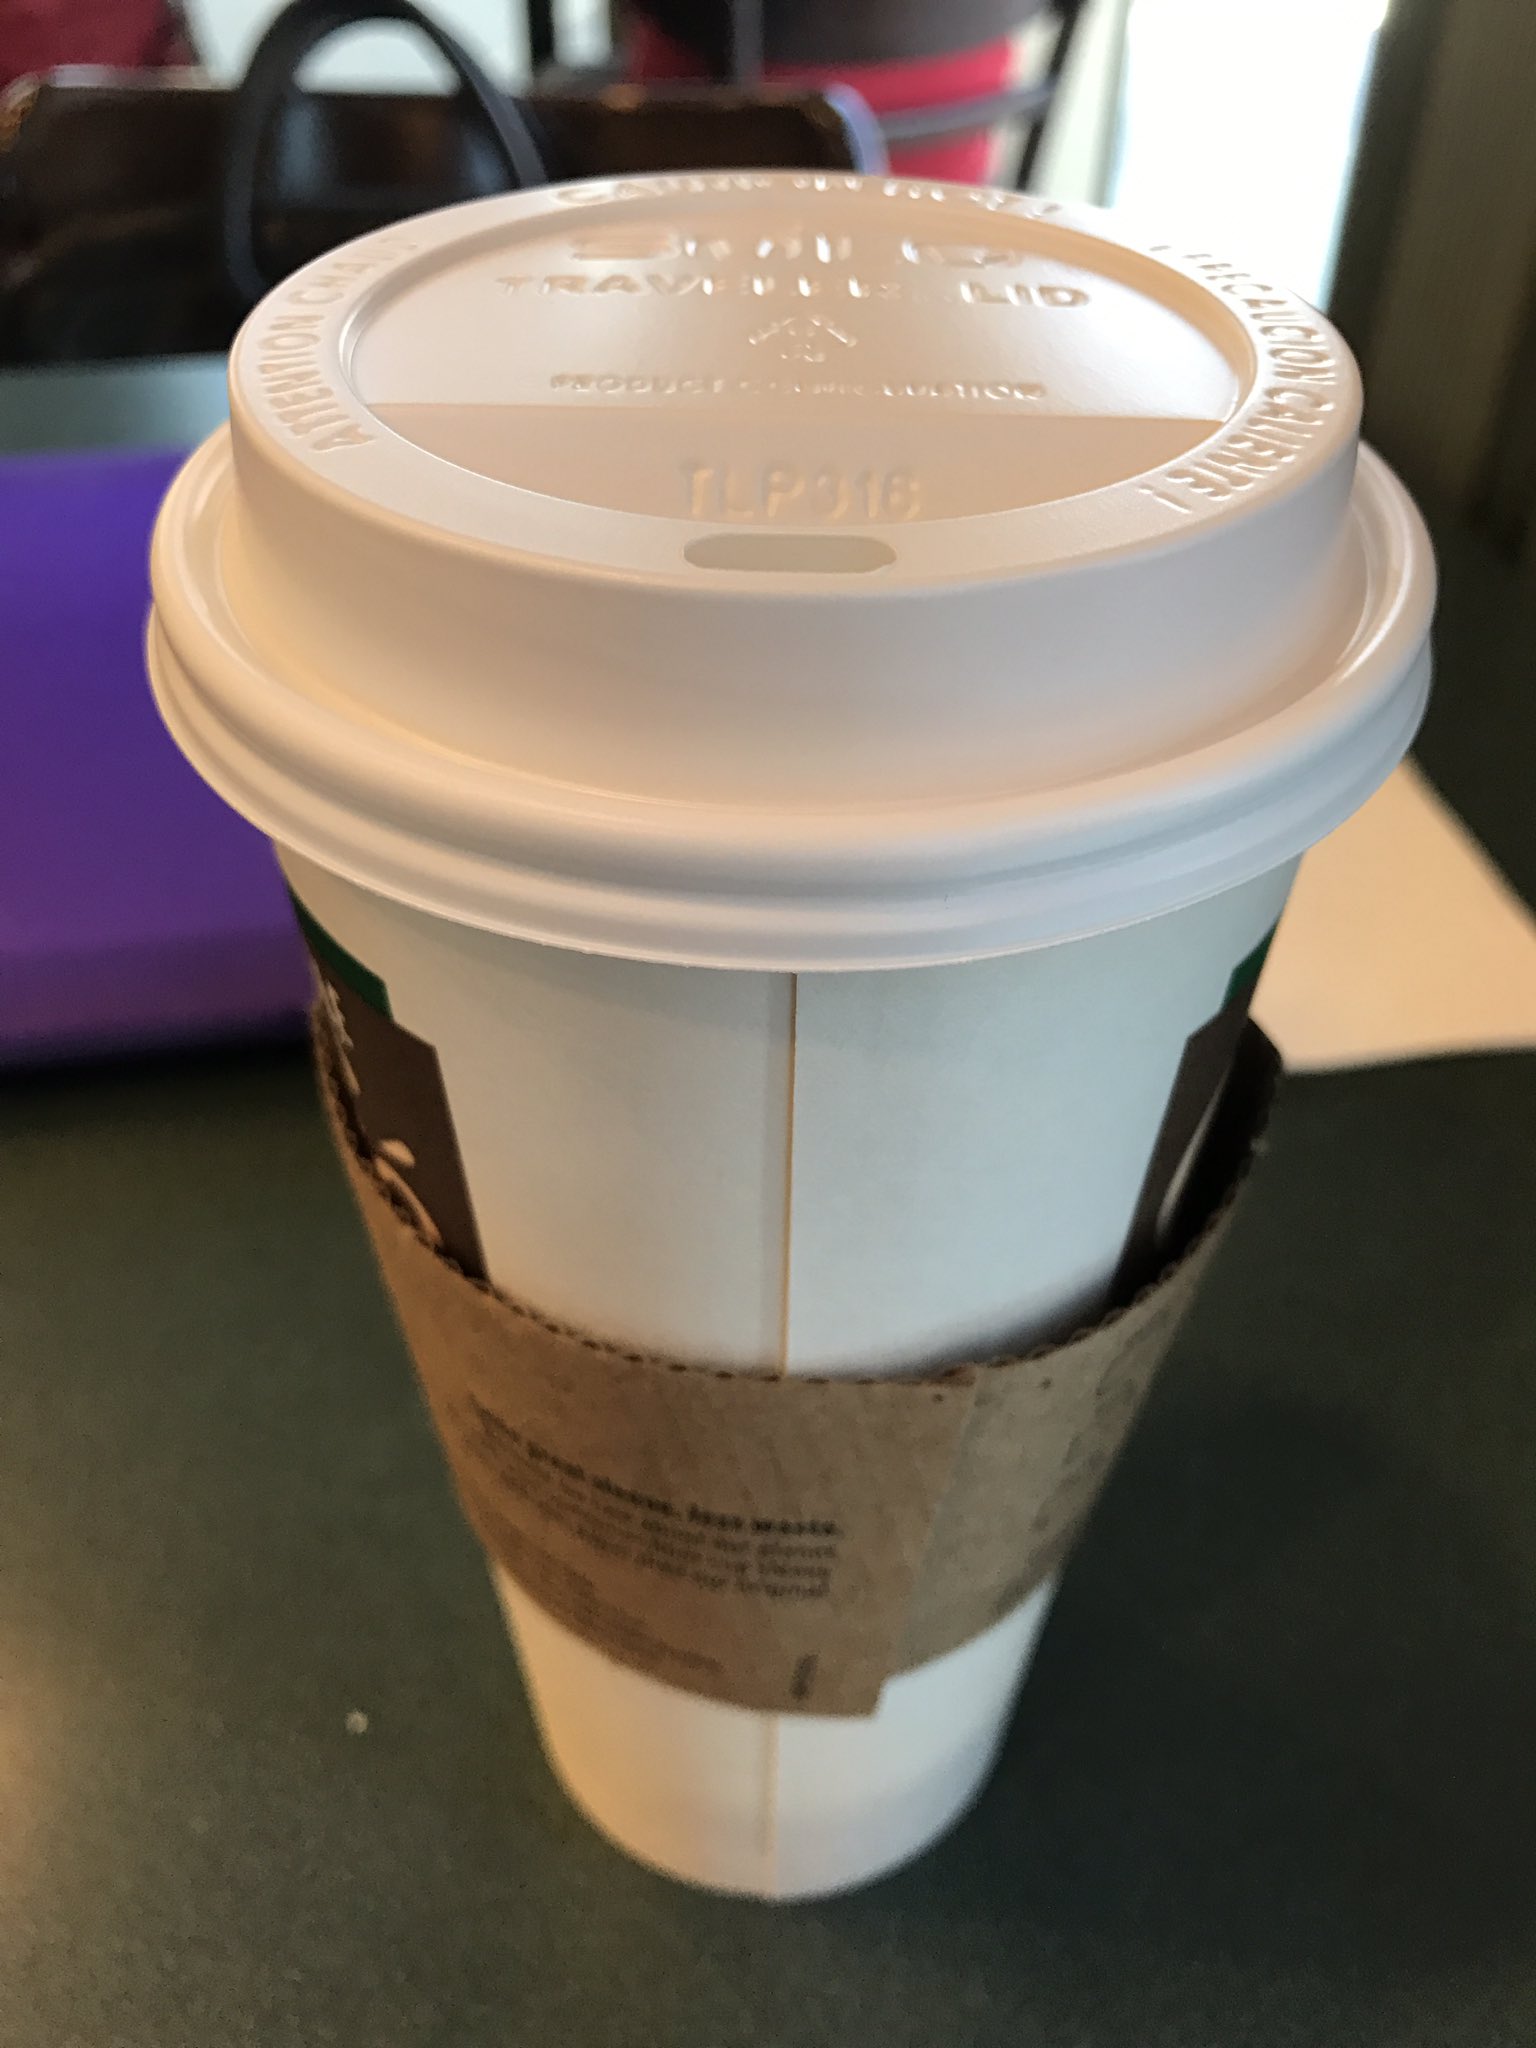 Paul Feig on X: Tip o' the day: If your Starbucks lid drink hole is lined  up w/ seam on the cup, it will act as a dribble cup & stain your